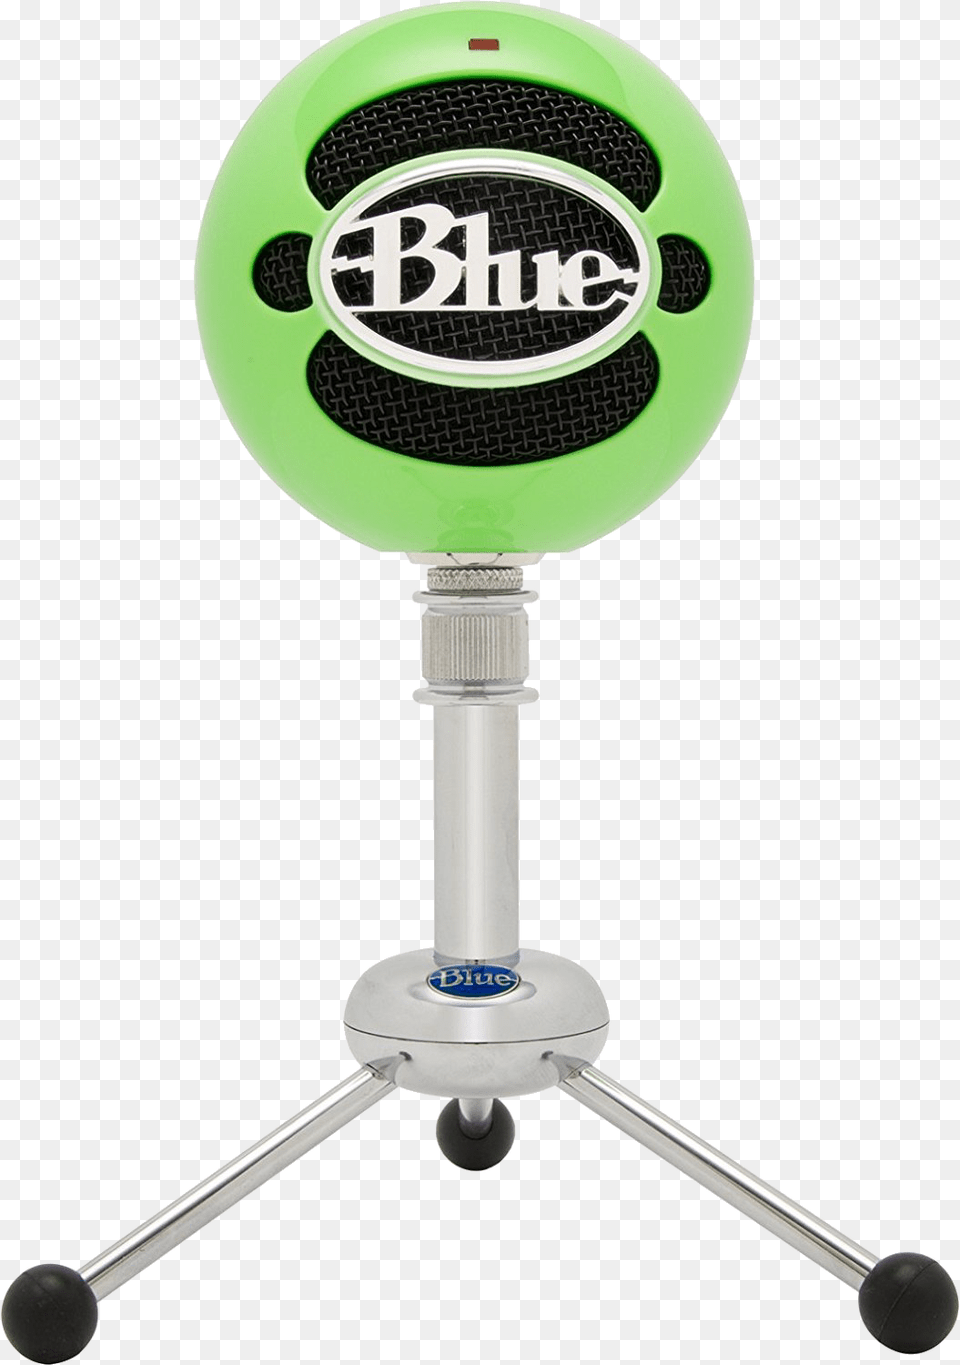 Blue Snowball Microphone Blue Snowball Mic Blue, Electrical Device, Mace Club, Weapon Png Image